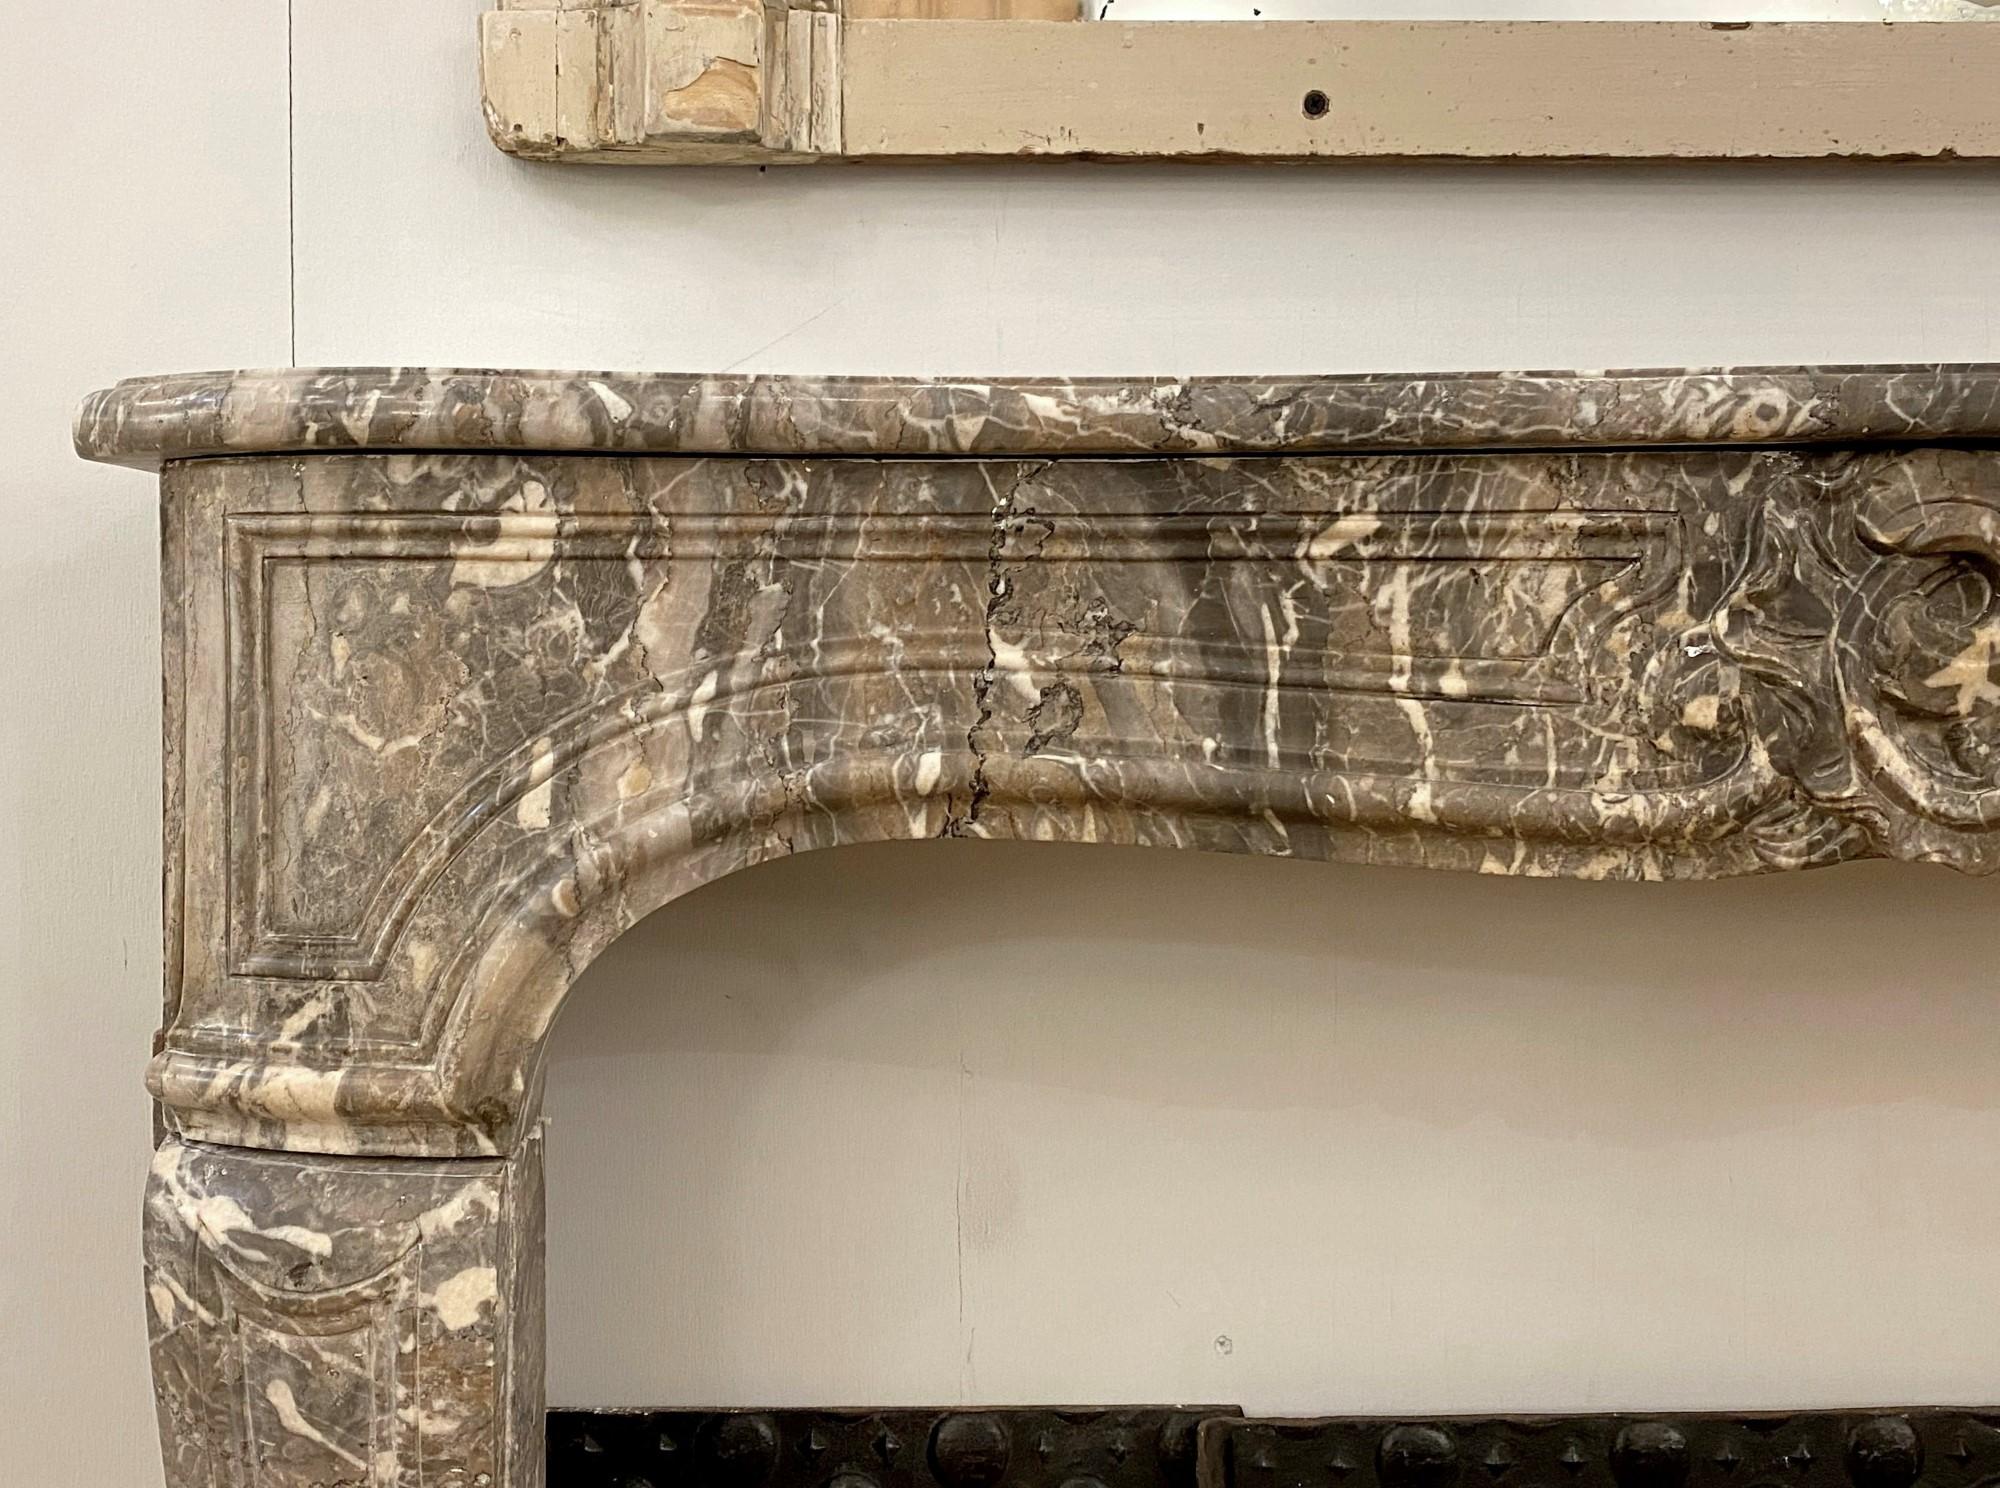 Hand carved gray French marble mantel in the Louis XV style with white veining from the 18th century. This can be seen at our 333 West 52nd St location in the Theater District West of Manhattan.